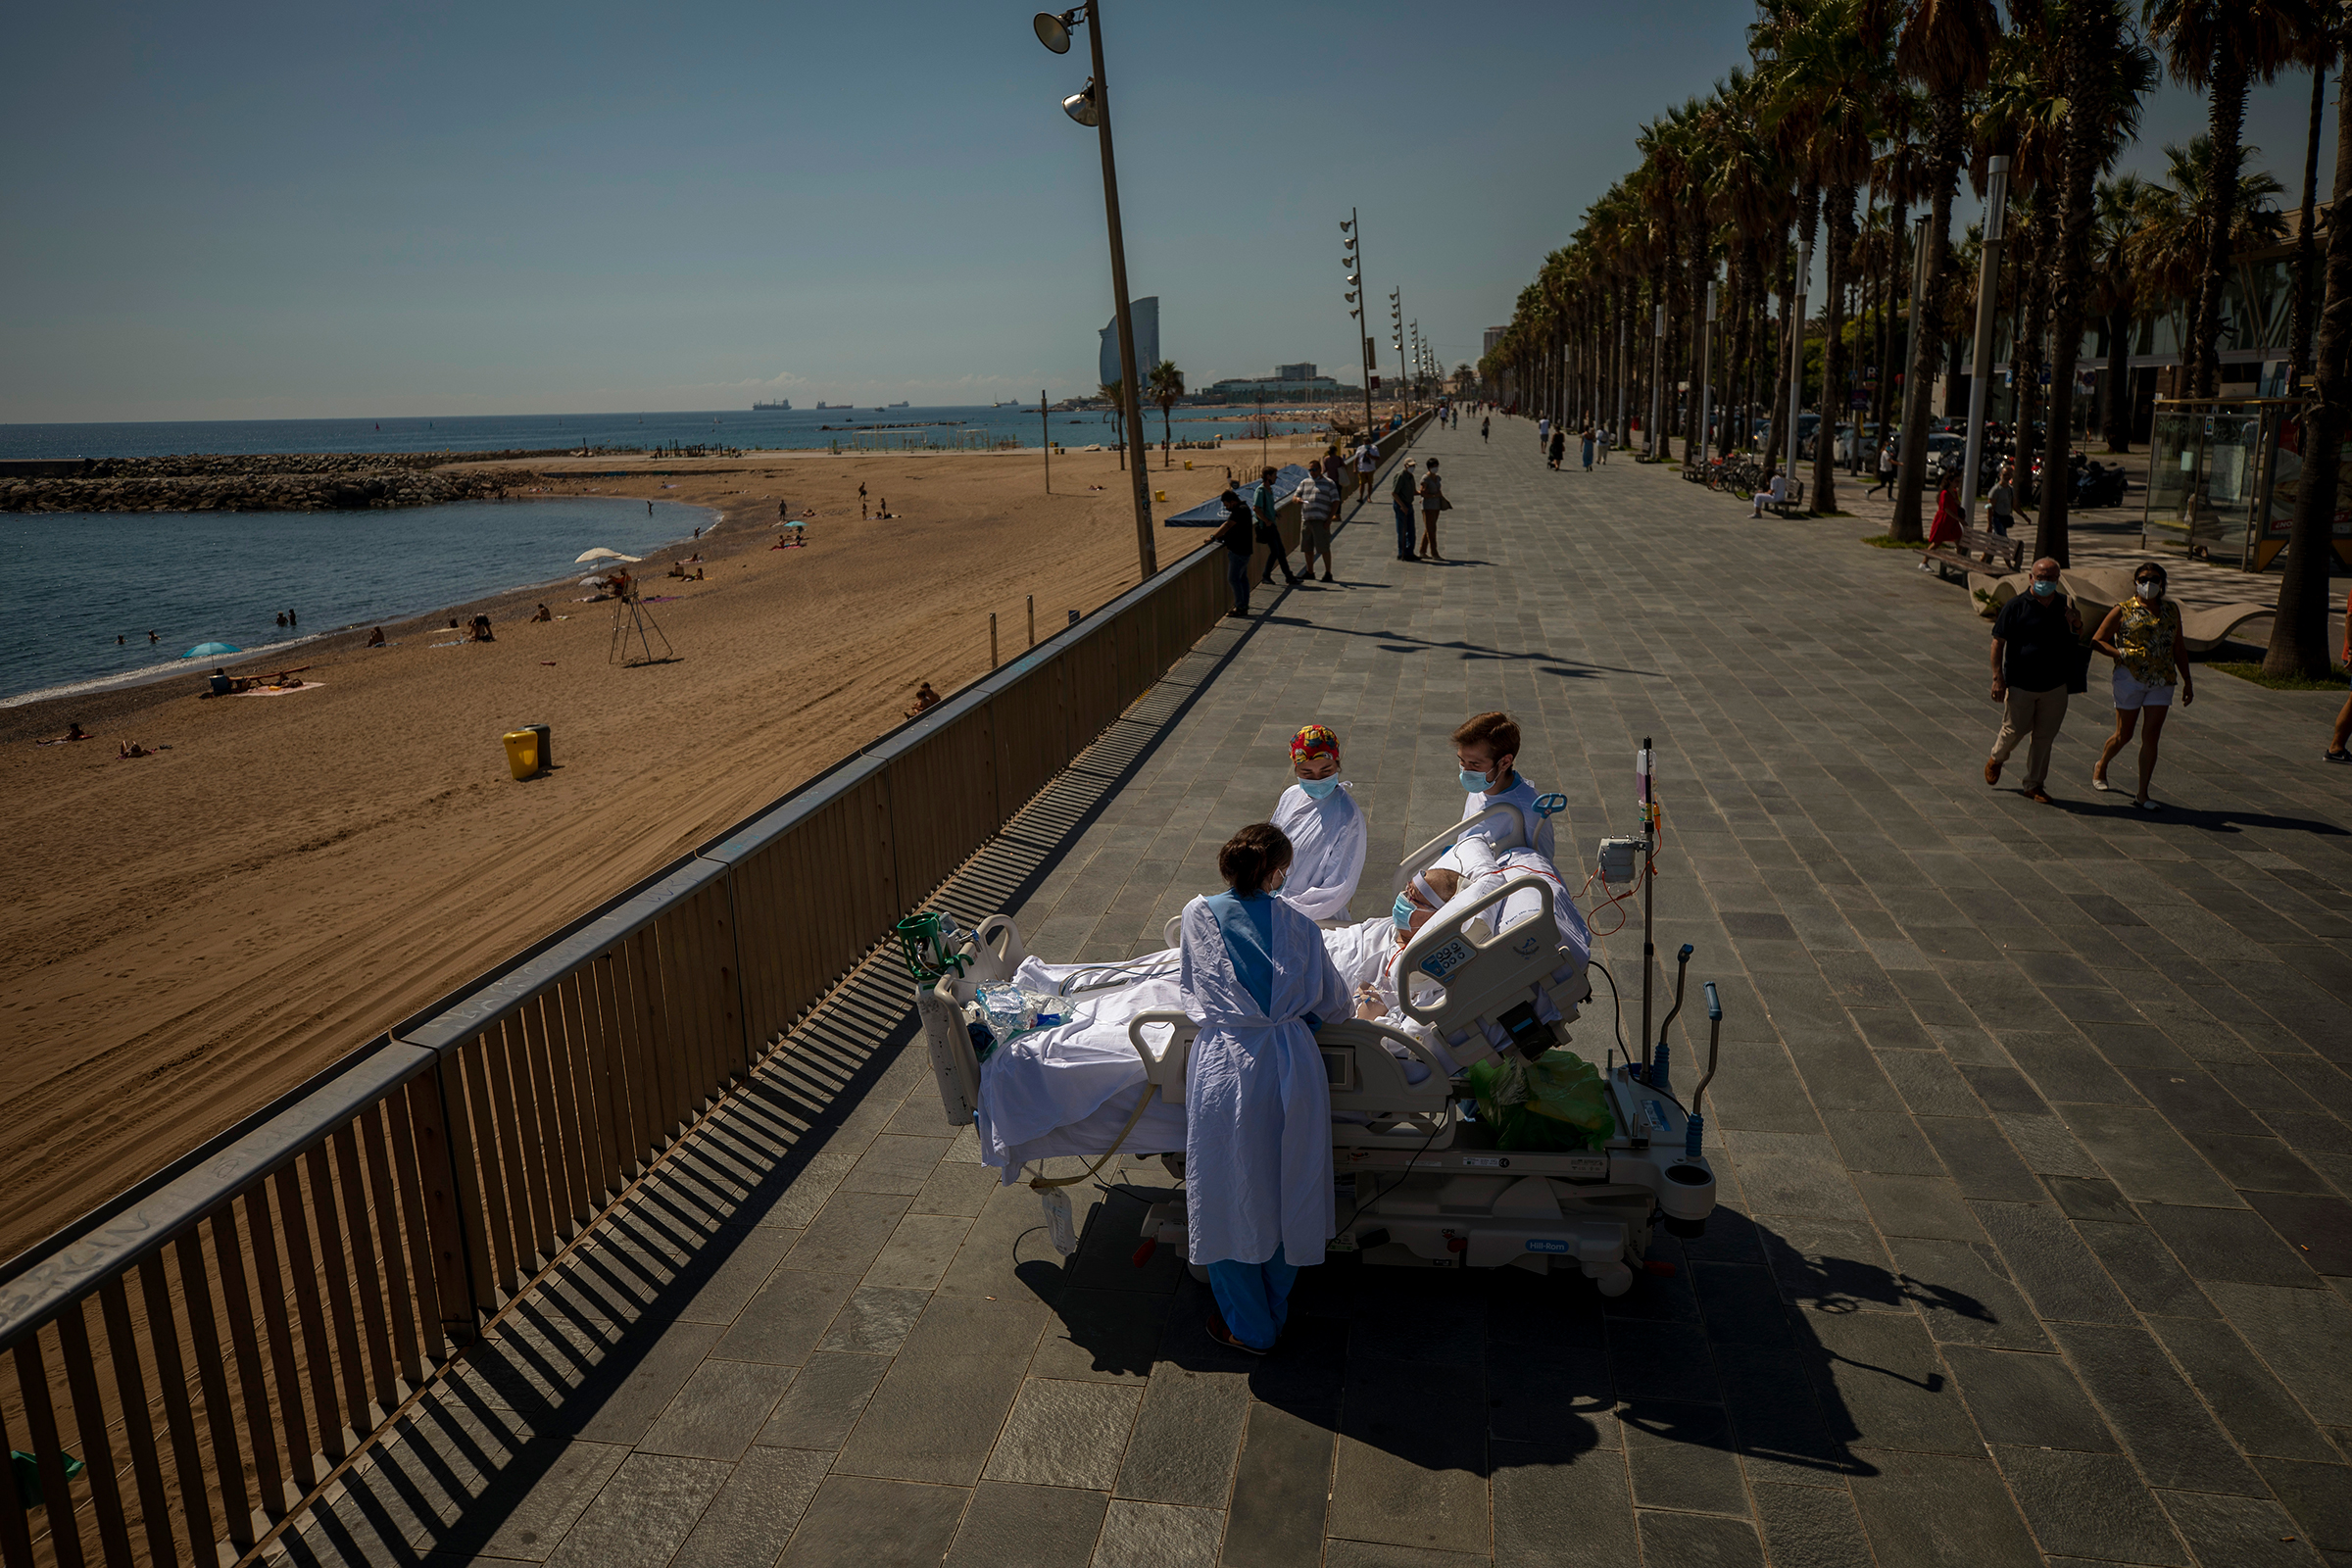 Francisco Espana, 60, is surrounded by members of his medical team on a promenade next to the Hospital del Mar in Barcelona on Sept. 4. (Emilio Morenatti—AP)